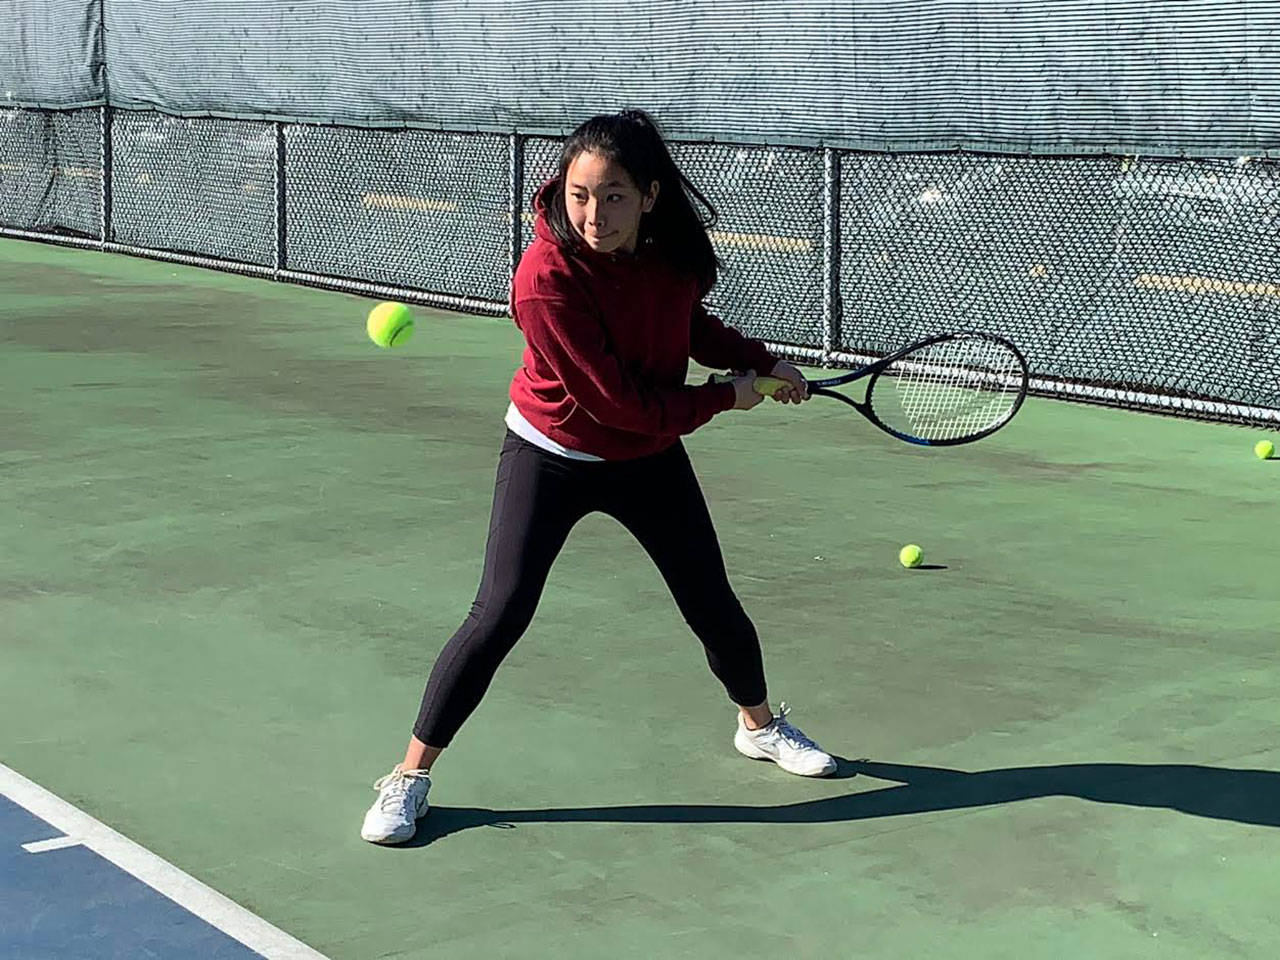 Lia Crawford, captain of the Vashon Island High School girls tennis team, practices her swing on Monday, March 9, at the school. (Kevin Opsahl/Staff Photo)